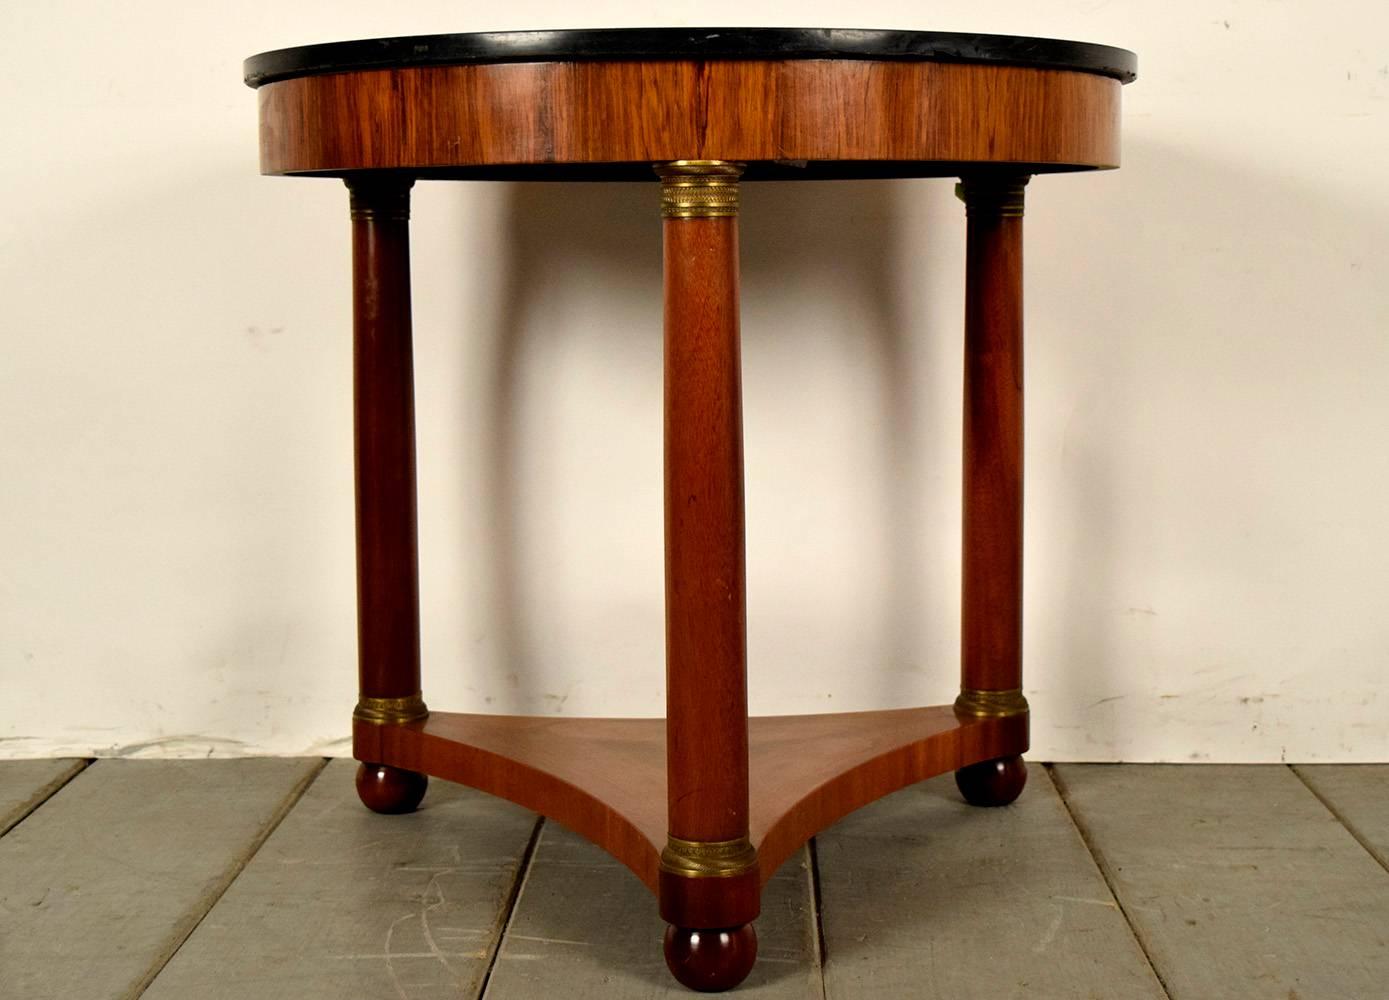 This is a 1900s French round end table. Has a black circular marble-top, solid wood frame, three columns with bronze accents on the top and bottoms and pedestal legs. Table is ready to be used and enjoyed for many years to come.